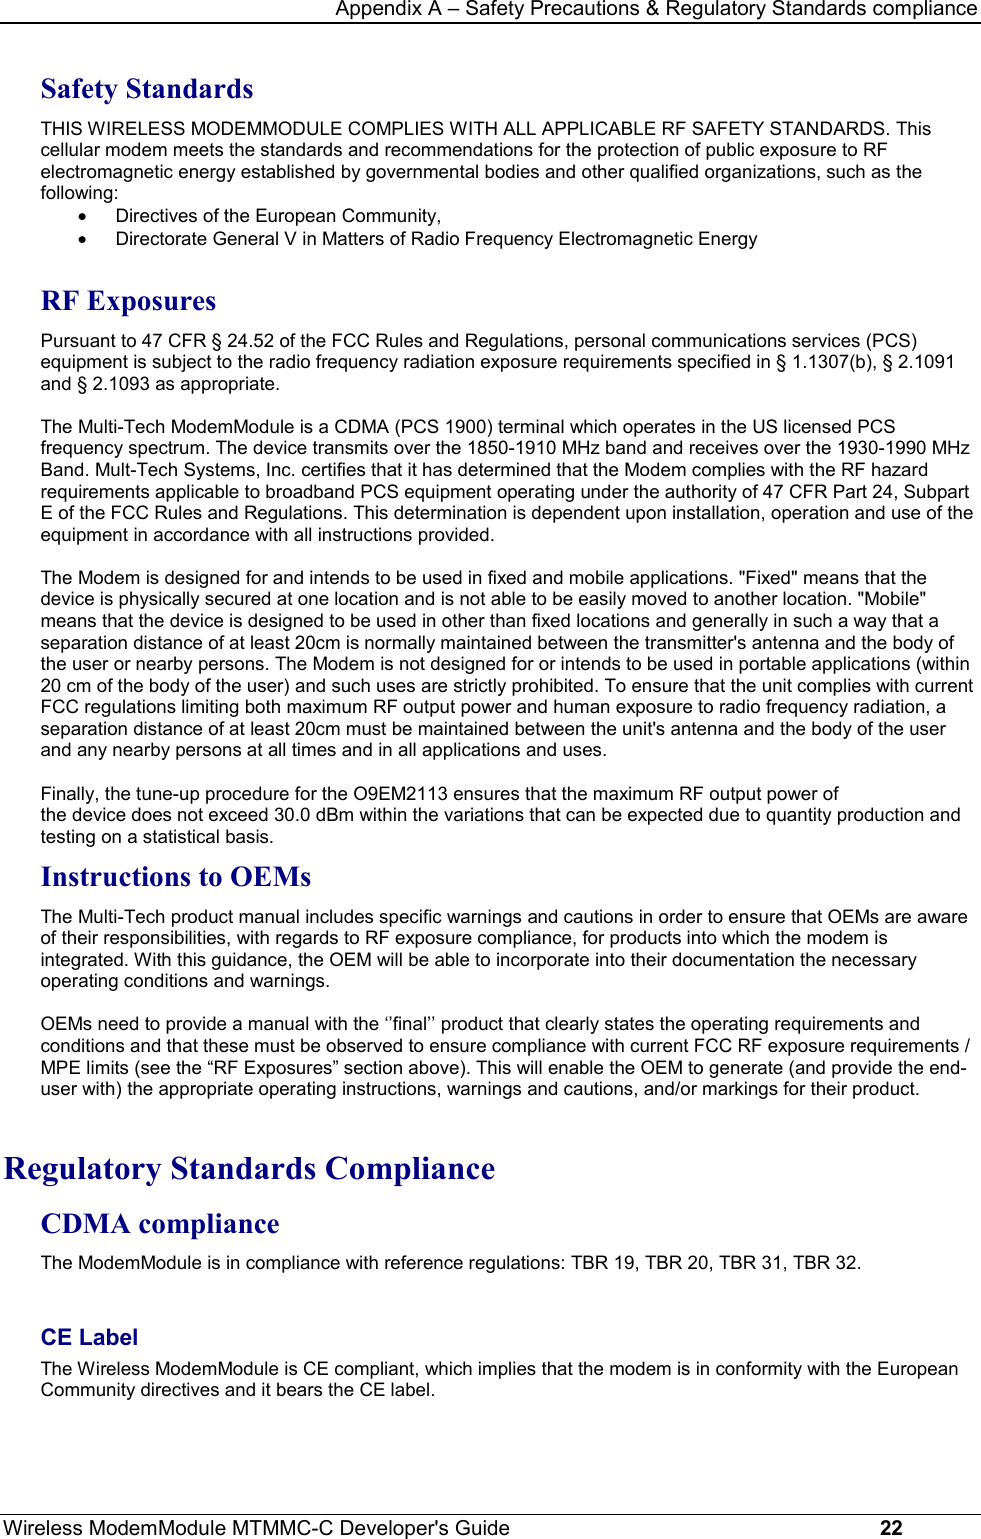 Appendix A – Safety Precautions &amp; Regulatory Standards complianceWireless ModemModule MTMMC-C Developer&apos;s Guide     22Safety StandardsTHIS WIRELESS MODEMMODULE COMPLIES WITH ALL APPLICABLE RF SAFETY STANDARDS. Thiscellular modem meets the standards and recommendations for the protection of public exposure to RFelectromagnetic energy established by governmental bodies and other qualified organizations, such as thefollowing: · Directives of the European Community, · Directorate General V in Matters of Radio Frequency Electromagnetic EnergyRF ExposuresPursuant to 47 CFR § 24.52 of the FCC Rules and Regulations, personal communications services (PCS)equipment is subject to the radio frequency radiation exposure requirements specified in § 1.1307(b), § 2.1091and § 2.1093 as appropriate.The Multi-Tech ModemModule is a CDMA (PCS 1900) terminal which operates in the US licensed PCSfrequency spectrum. The device transmits over the 1850-1910 MHz band and receives over the 1930-1990 MHzBand. Mult-Tech Systems, Inc. certifies that it has determined that the Modem complies with the RF hazardrequirements applicable to broadband PCS equipment operating under the authority of 47 CFR Part 24, SubpartE of the FCC Rules and Regulations. This determination is dependent upon installation, operation and use of theequipment in accordance with all instructions provided.The Modem is designed for and intends to be used in fixed and mobile applications. &quot;Fixed&quot; means that thedevice is physically secured at one location and is not able to be easily moved to another location. &quot;Mobile&quot;means that the device is designed to be used in other than fixed locations and generally in such a way that aseparation distance of at least 20cm is normally maintained between the transmitter&apos;s antenna and the body ofthe user or nearby persons. The Modem is not designed for or intends to be used in portable applications (within20 cm of the body of the user) and such uses are strictly prohibited. To ensure that the unit complies with currentFCC regulations limiting both maximum RF output power and human exposure to radio frequency radiation, aseparation distance of at least 20cm must be maintained between the unit&apos;s antenna and the body of the userand any nearby persons at all times and in all applications and uses. Finally, the tune-up procedure for the O9EM2113 ensures that the maximum RF output power ofthe device does not exceed 30.0 dBm within the variations that can be expected due to quantity production andtesting on a statistical basis.Instructions to OEMsThe Multi-Tech product manual includes specific warnings and cautions in order to ensure that OEMs are awareof their responsibilities, with regards to RF exposure compliance, for products into which the modem isintegrated. With this guidance, the OEM will be able to incorporate into their documentation the necessaryoperating conditions and warnings. OEMs need to provide a manual with the ‘’final’’ product that clearly states the operating requirements andconditions and that these must be observed to ensure compliance with current FCC RF exposure requirements /MPE limits (see the “RF Exposures” section above). This will enable the OEM to generate (and provide the end-user with) the appropriate operating instructions, warnings and cautions, and/or markings for their product.Regulatory Standards ComplianceCDMA complianceThe ModemModule is in compliance with reference regulations: TBR 19, TBR 20, TBR 31, TBR 32.CE LabelThe Wireless ModemModule is CE compliant, which implies that the modem is in conformity with the EuropeanCommunity directives and it bears the CE label.